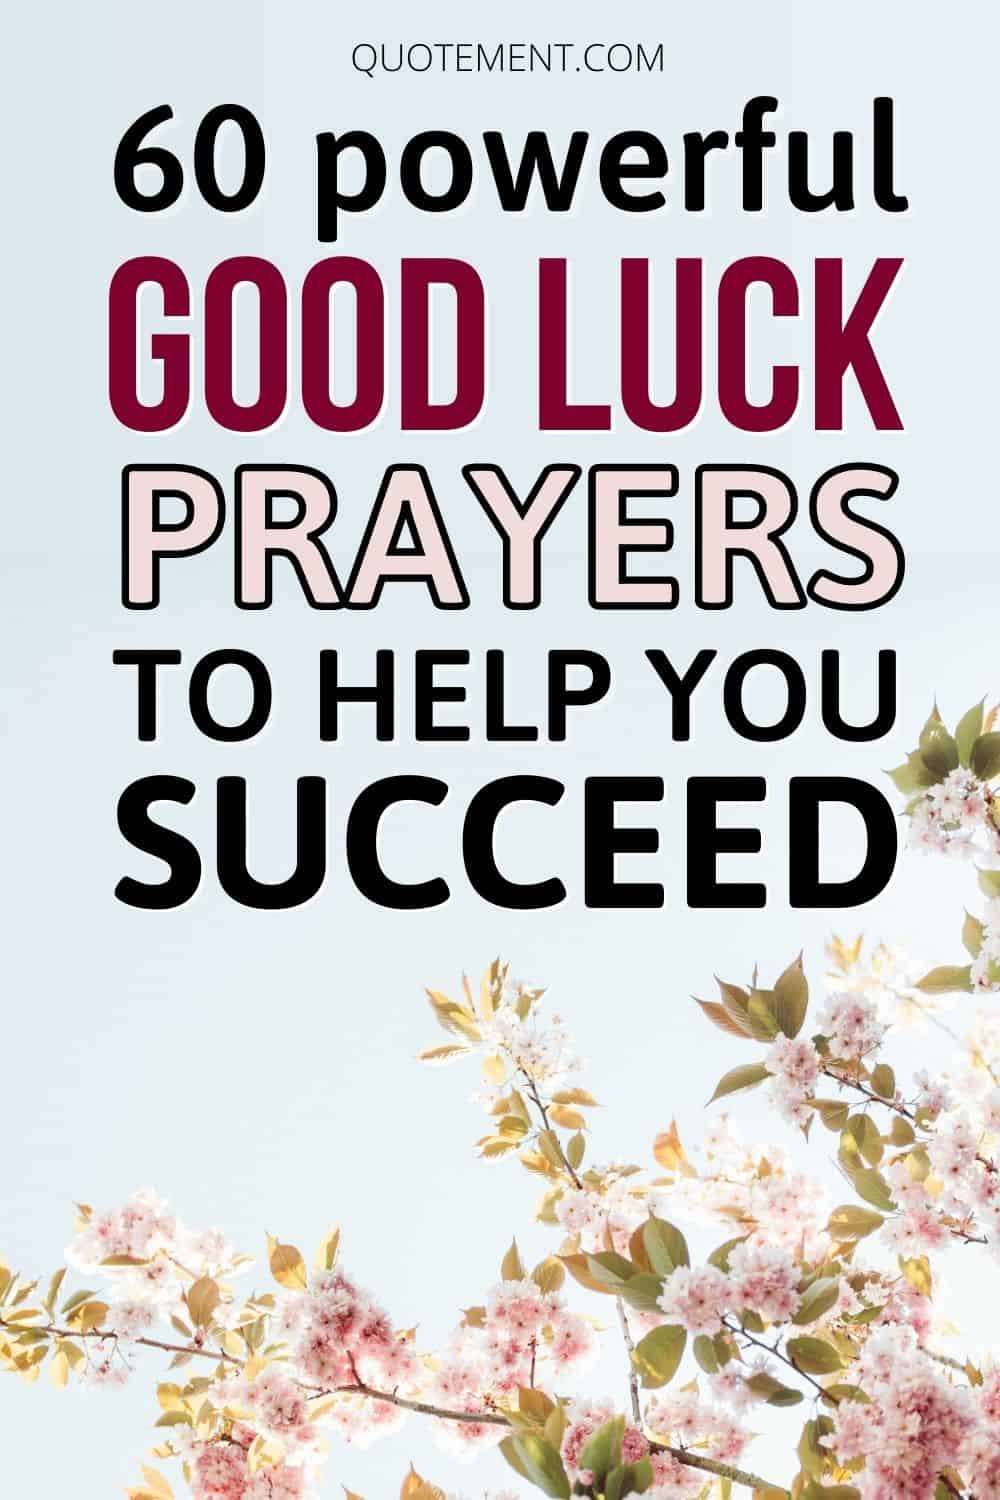 60 Powerful Prayers For Good Luck To Help You Succeed | vlr.eng.br